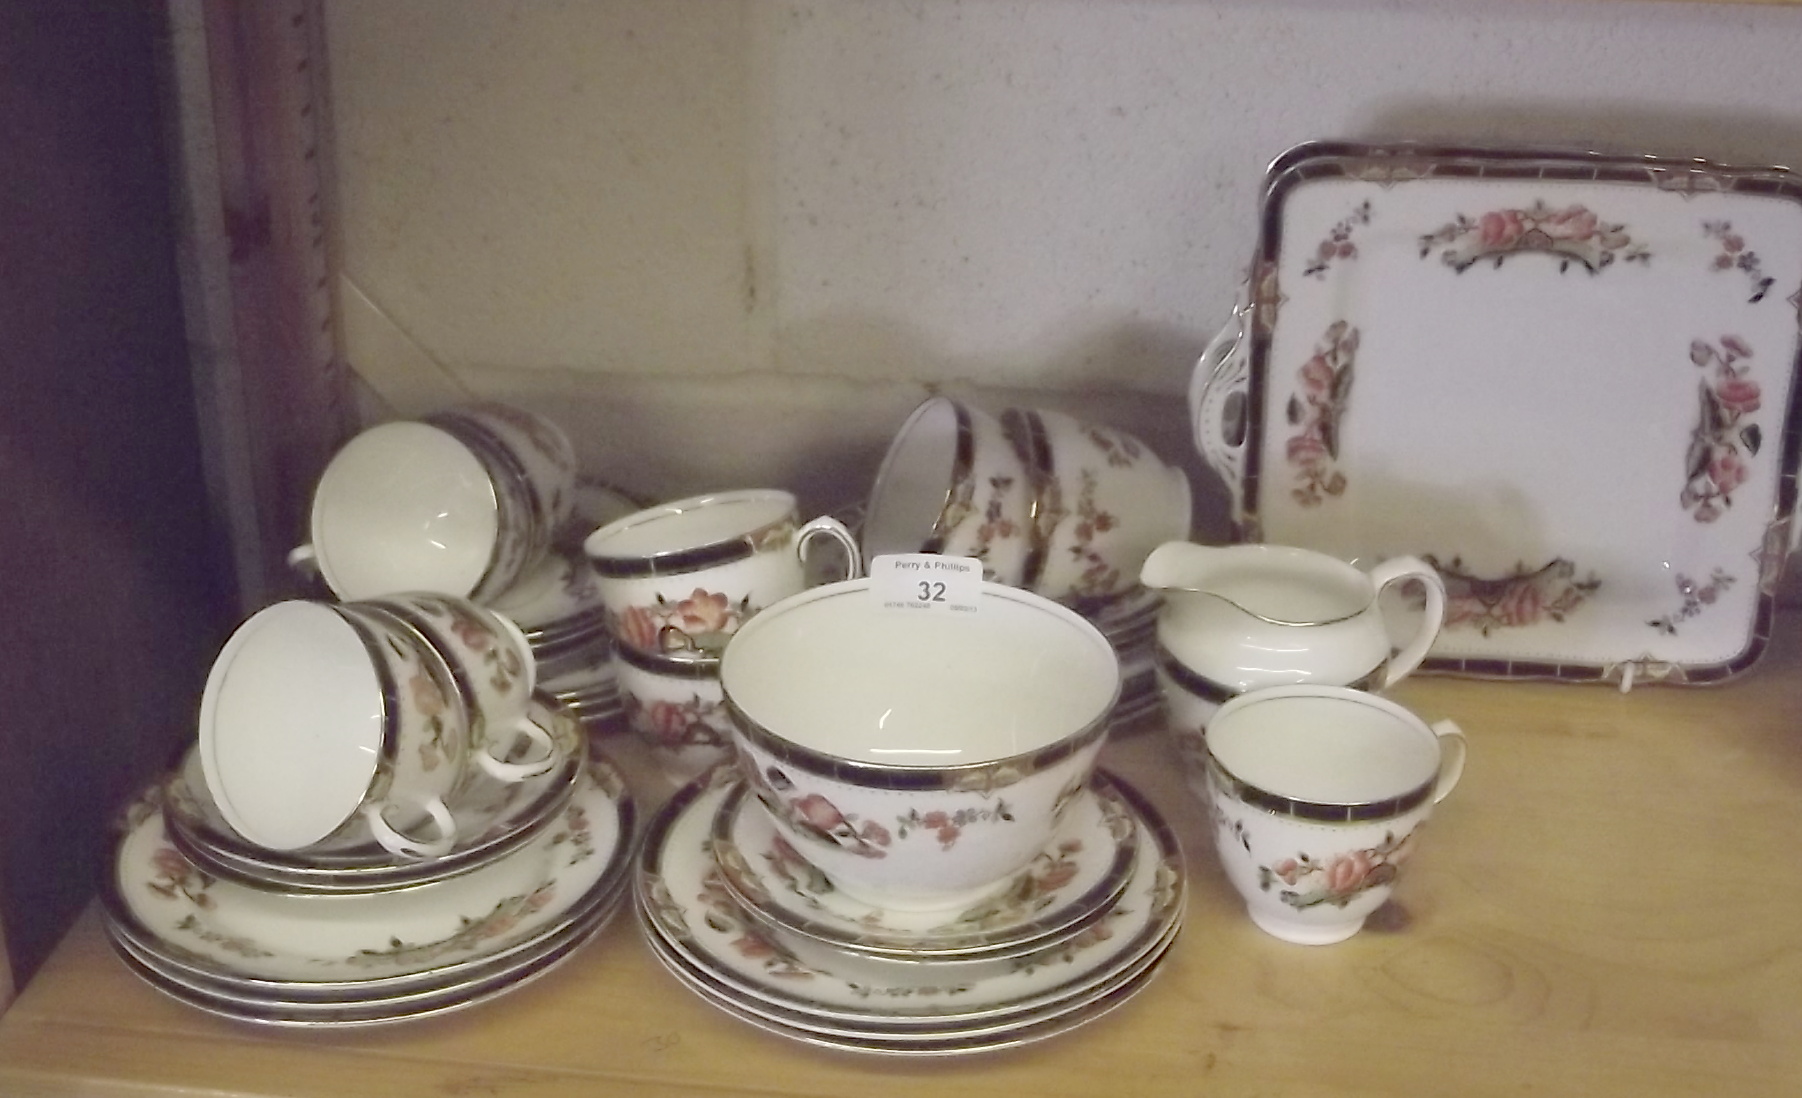 Staffordshire Porcelain Eight Setting Tea Service with Cake Plates